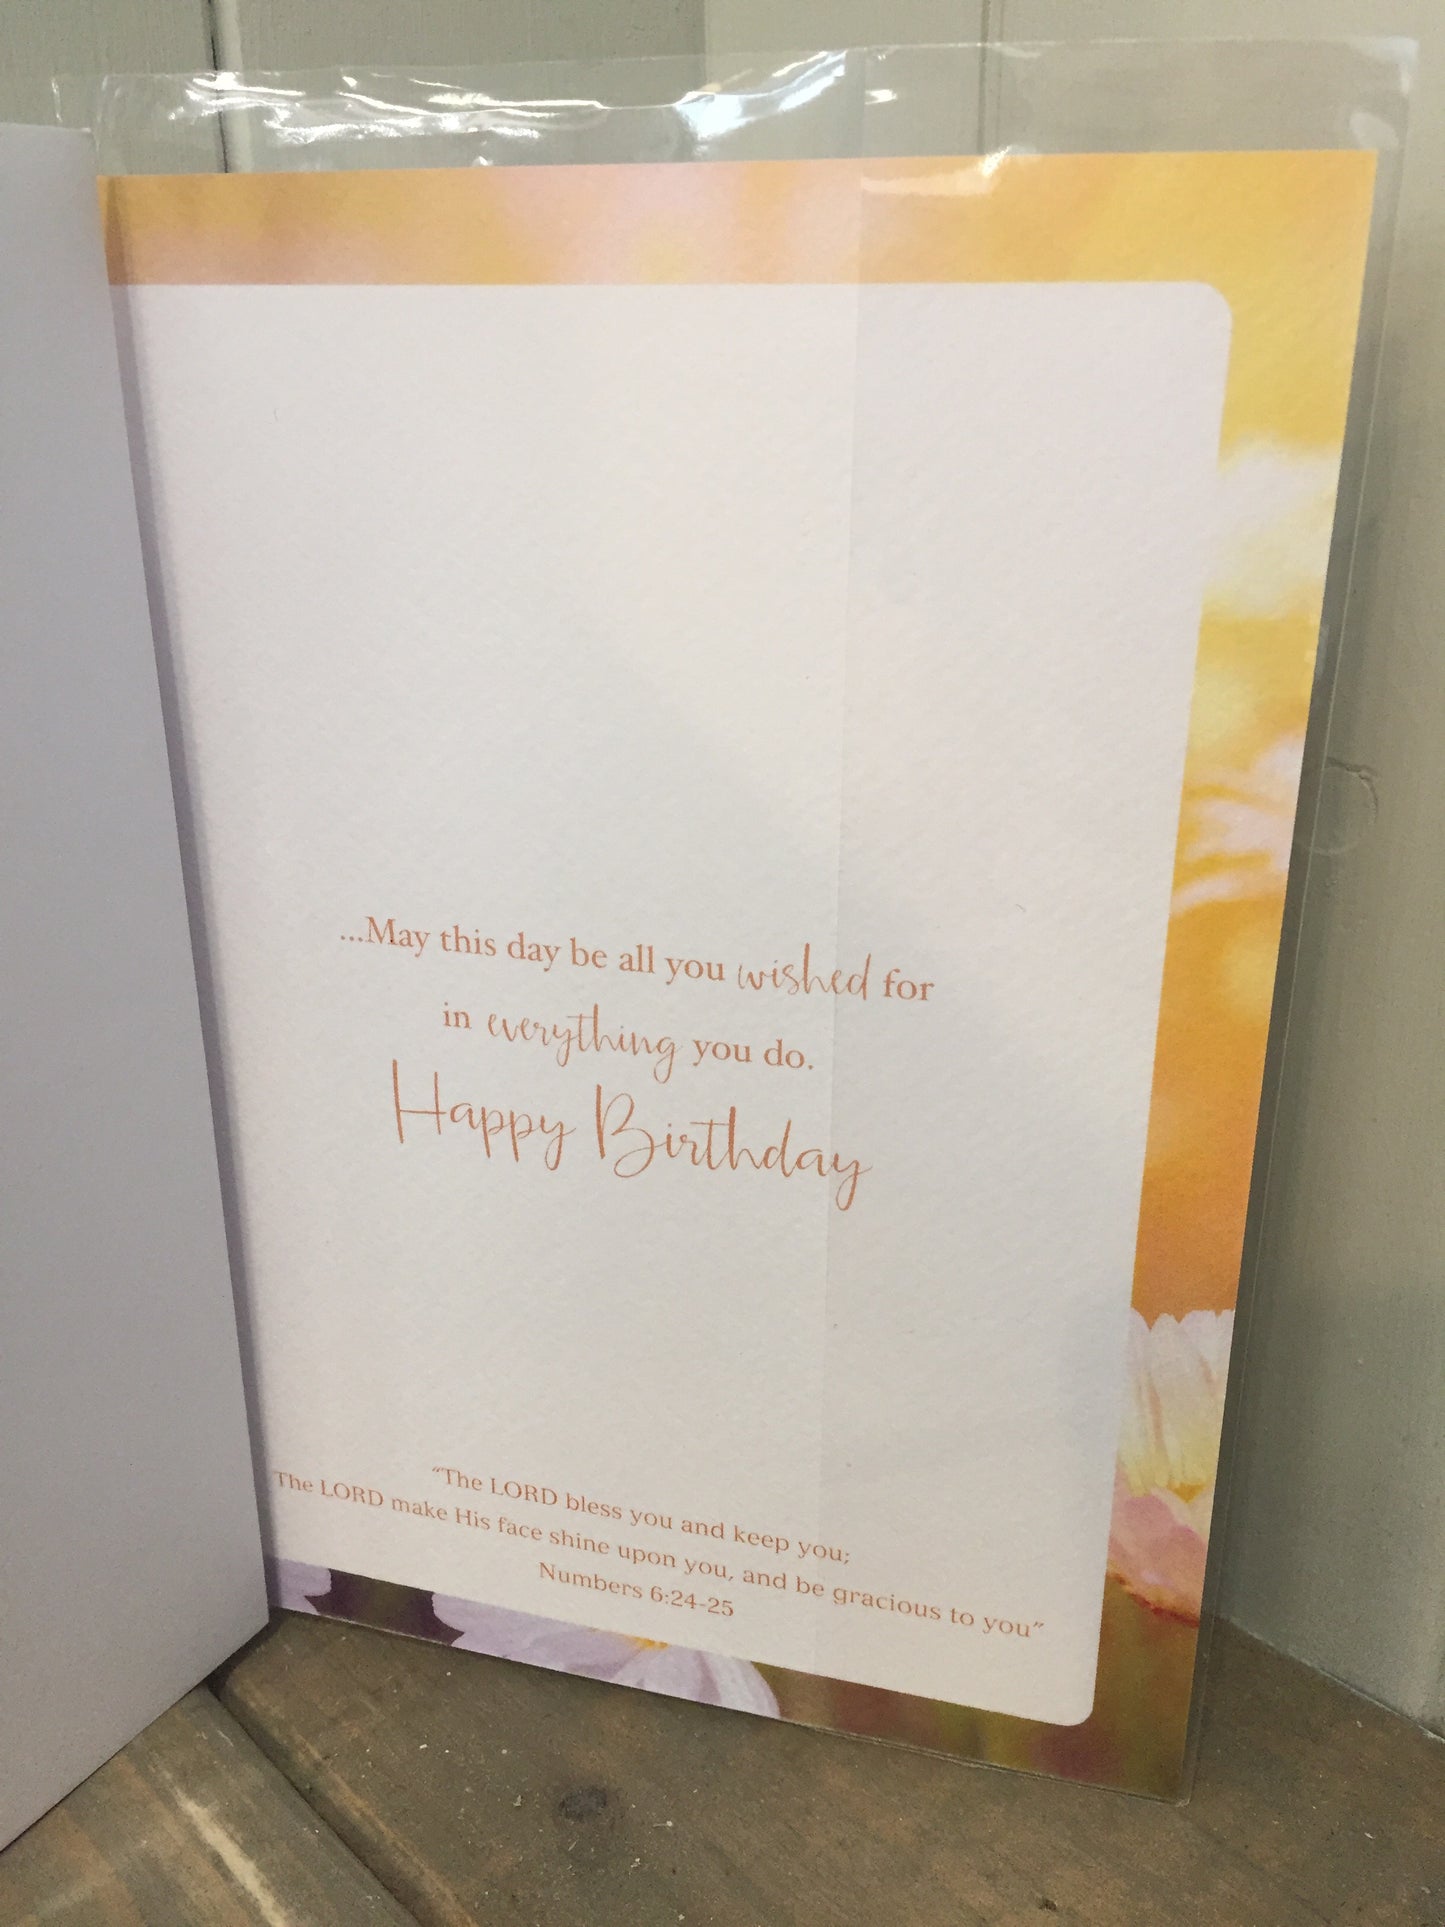 To a special Grandmother on your Birthday Card (5504605257888)